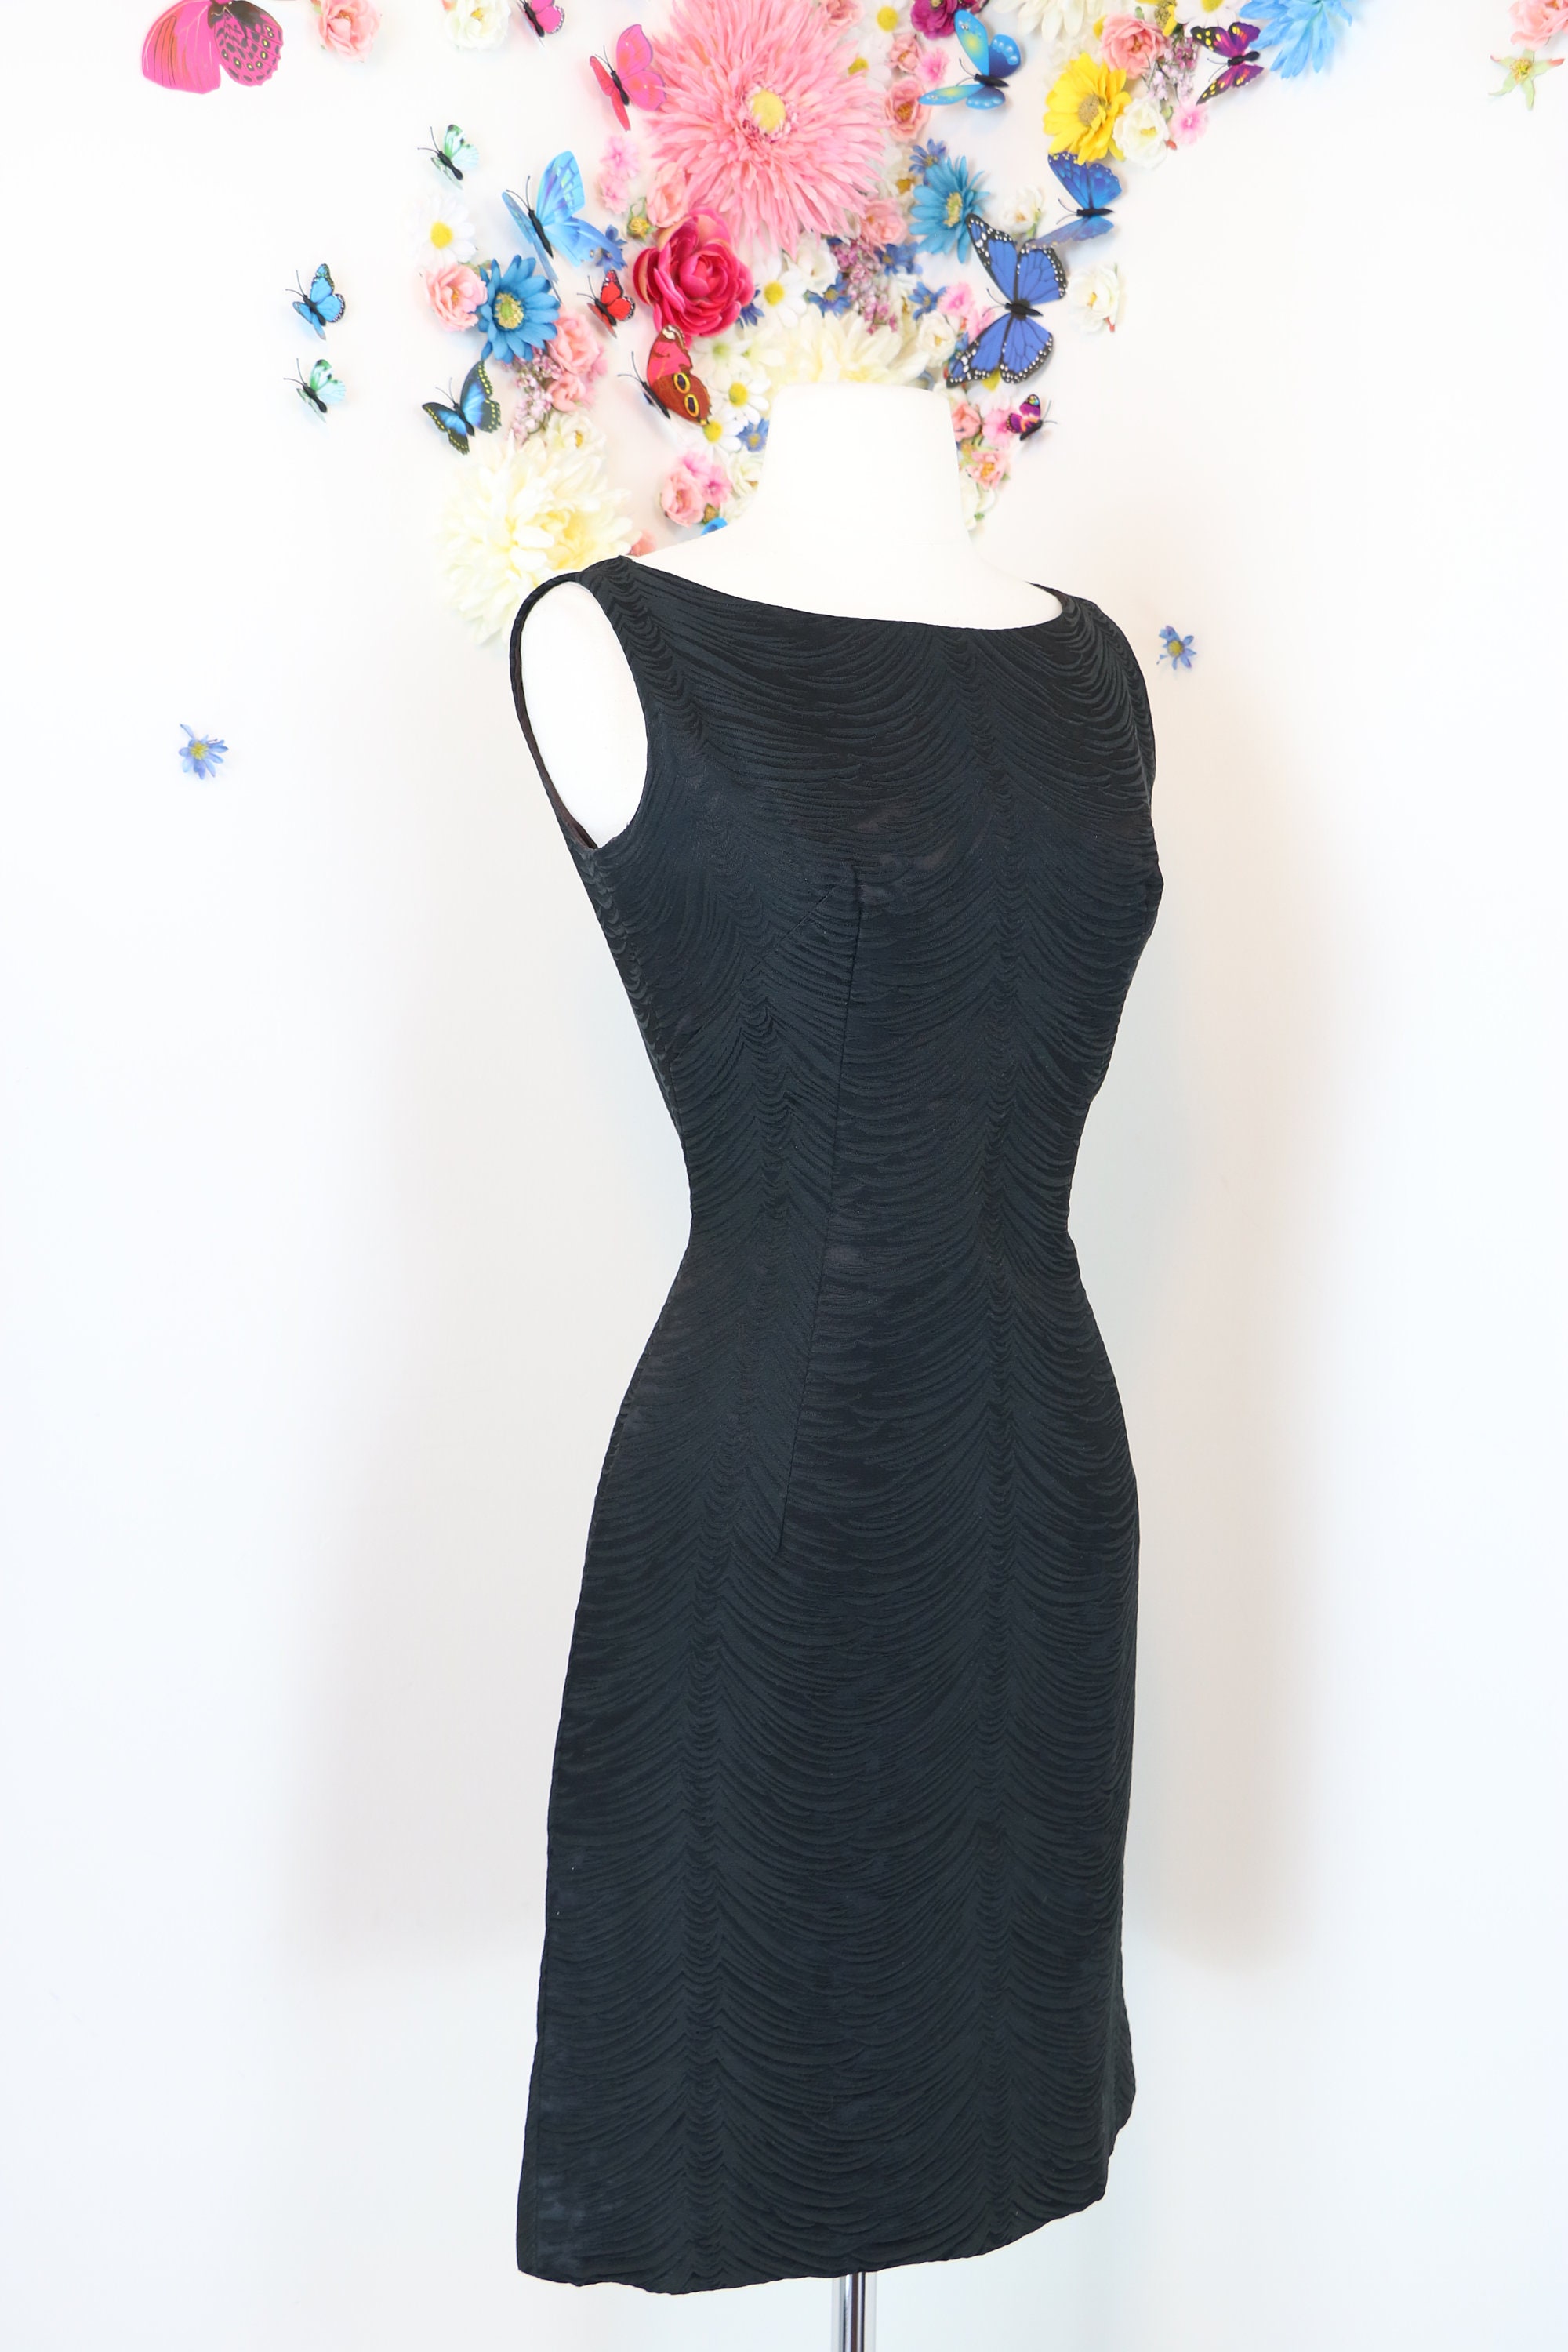 1950s 60s Little Black Dress Body Con Wiggle Party | Etsy Canada